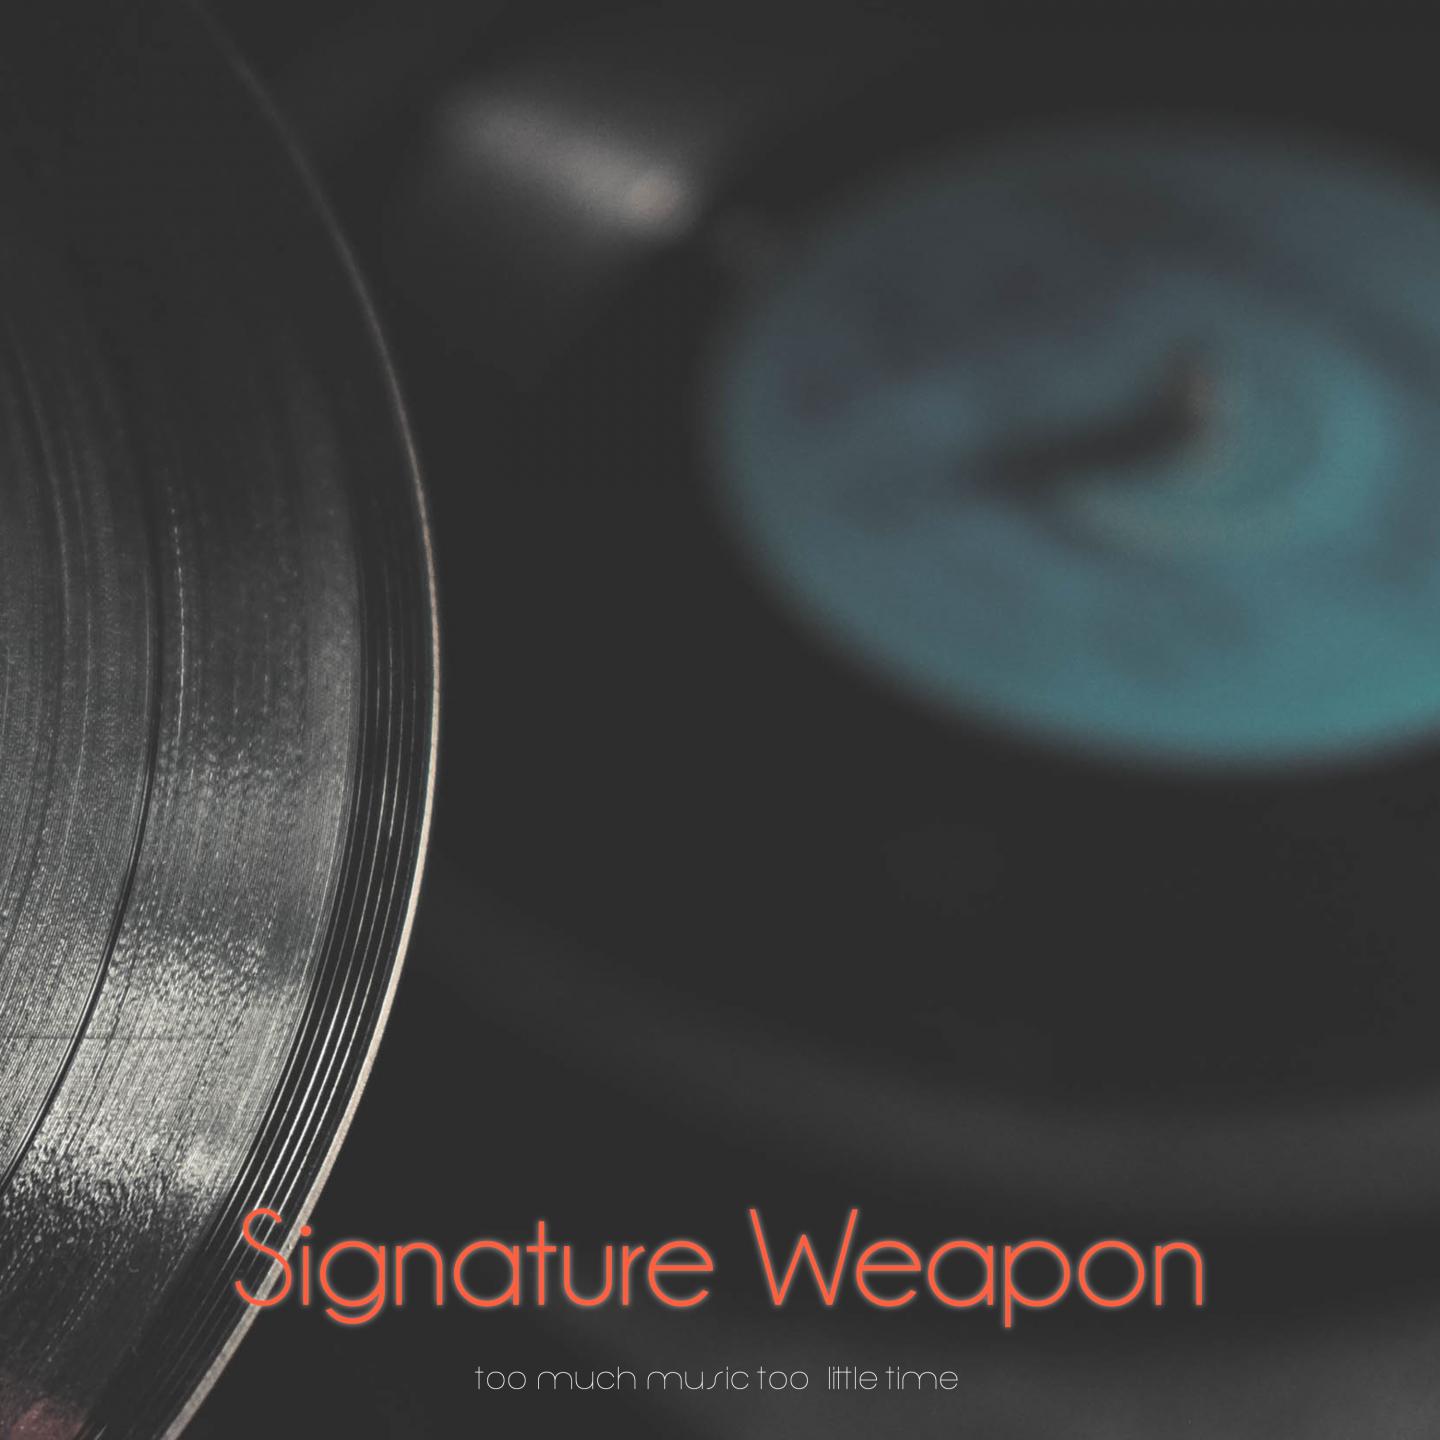 Signature Weapon (So Much Music Too Little Time)